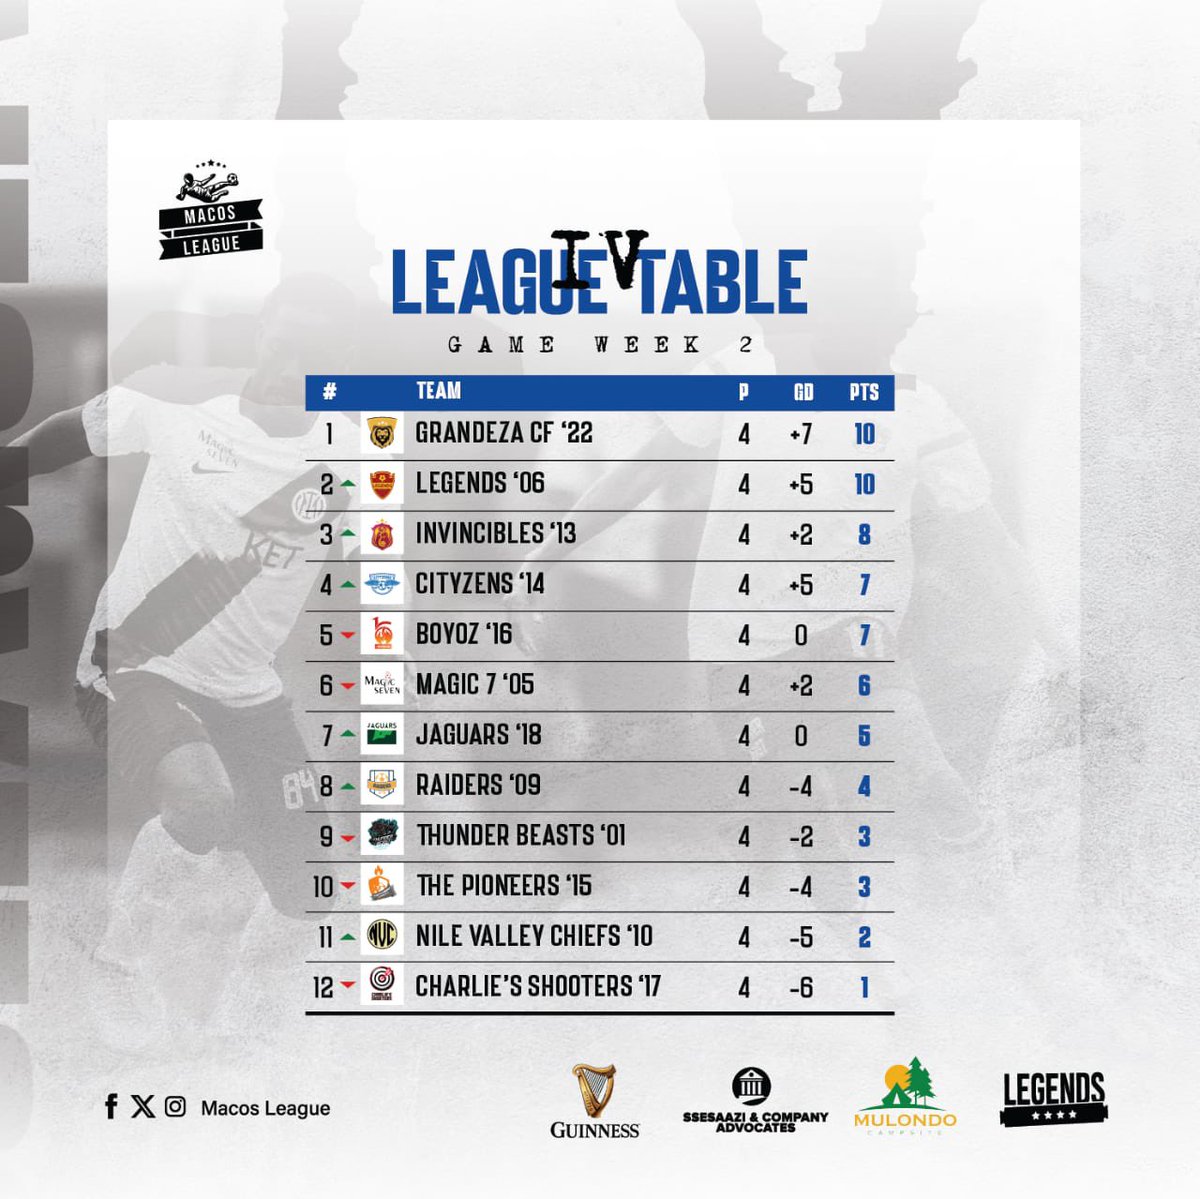 Here’s how things stand after another exhilarating #MacosLeague match day ⬇️ @cf_grandez16 maintain their spot at the 🔝 with 10 points 💪 #MacosLeagueIV